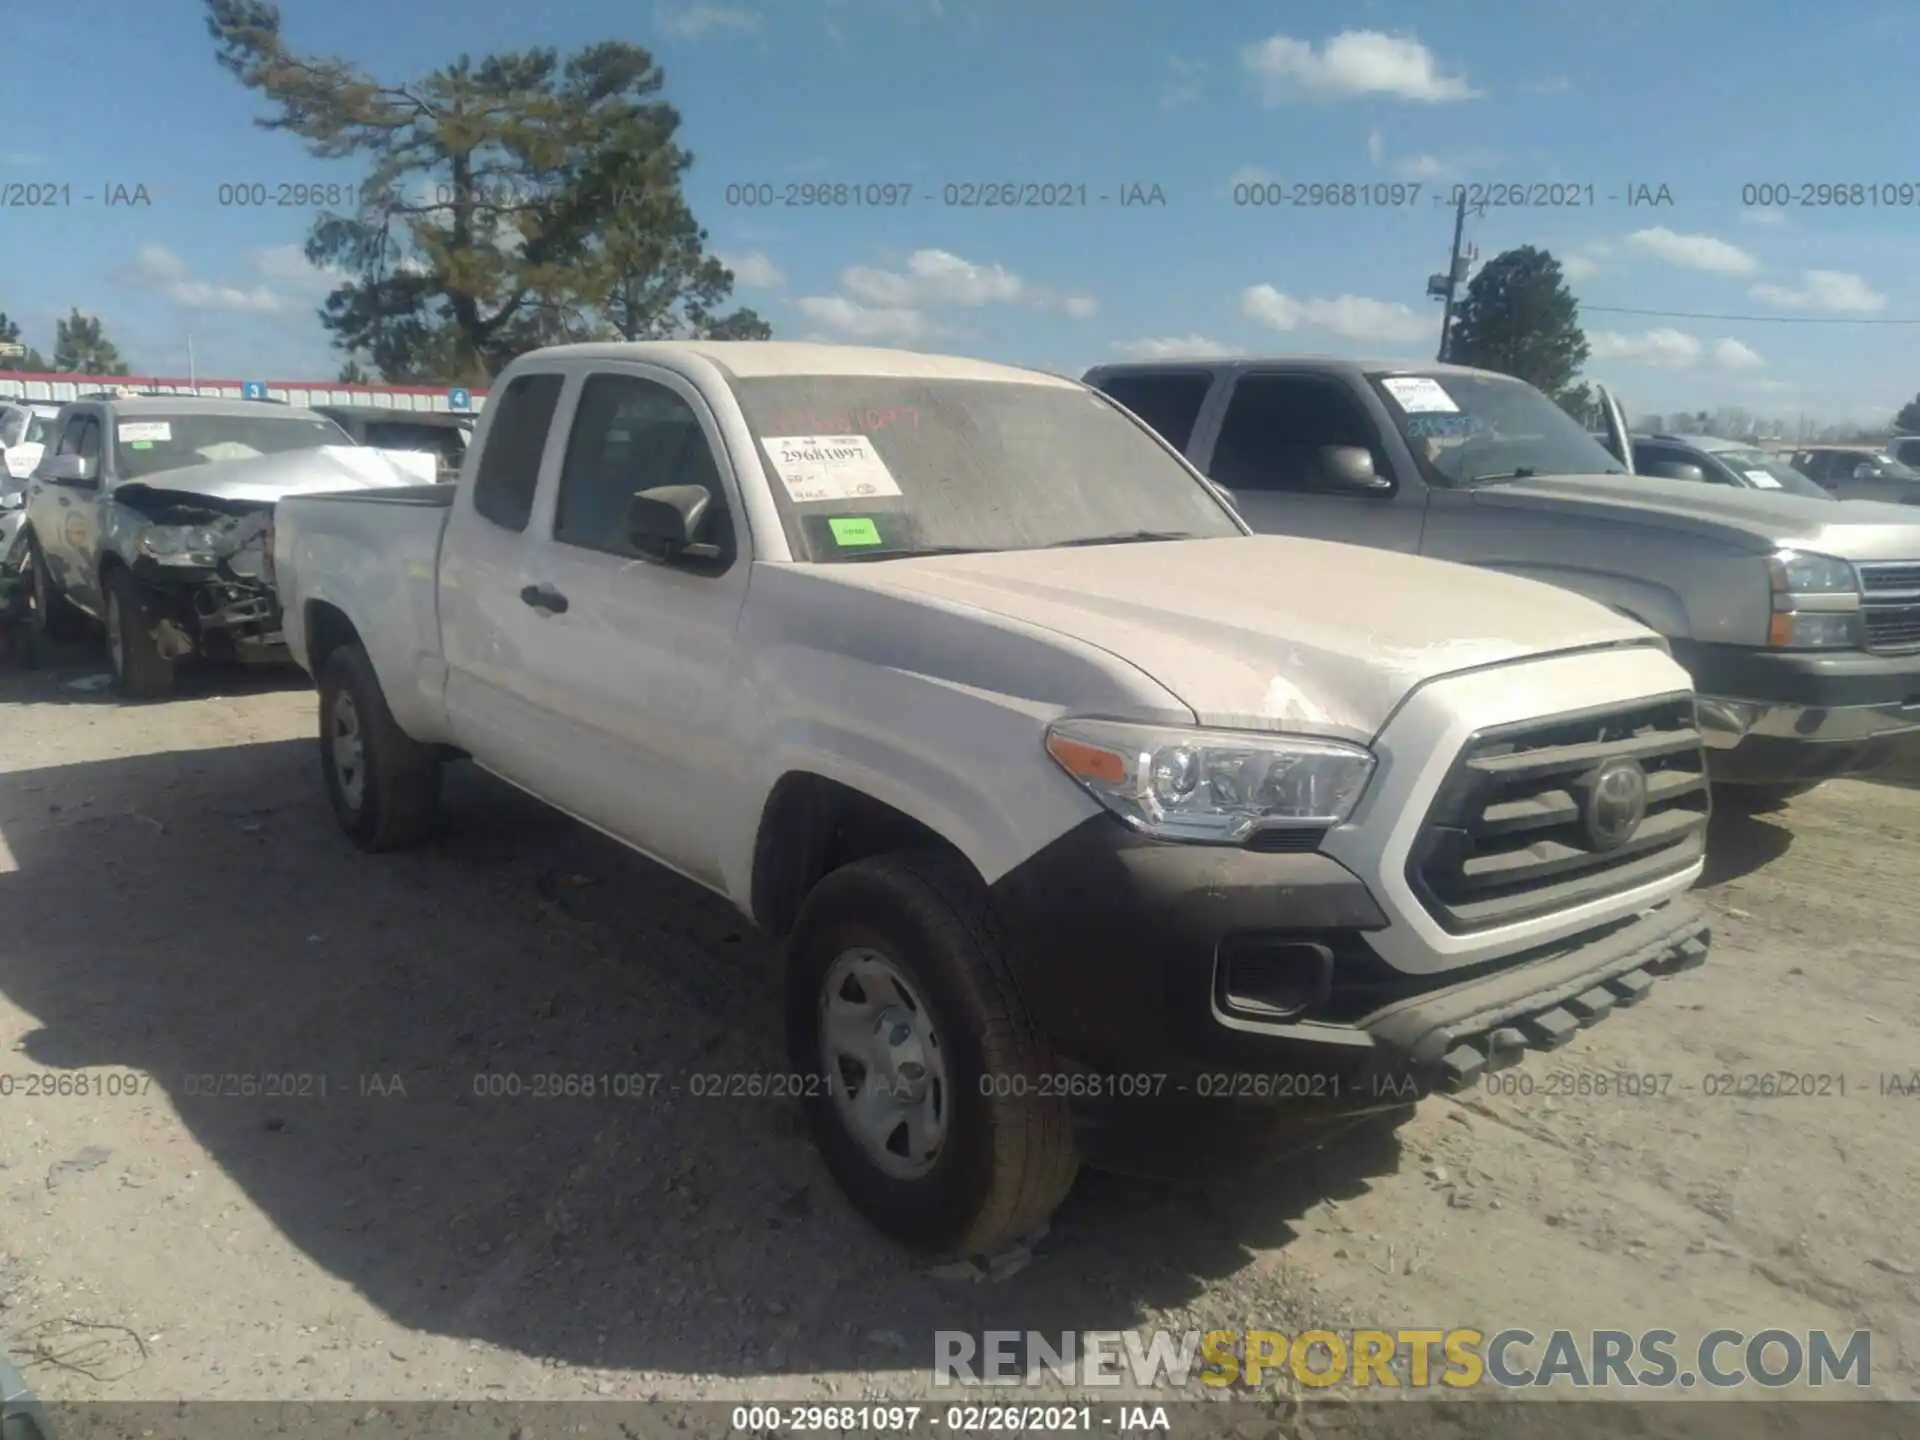 1 Photograph of a damaged car 3TYRX5GN9LT003695 TOYOTA TACOMA 2WD 2020